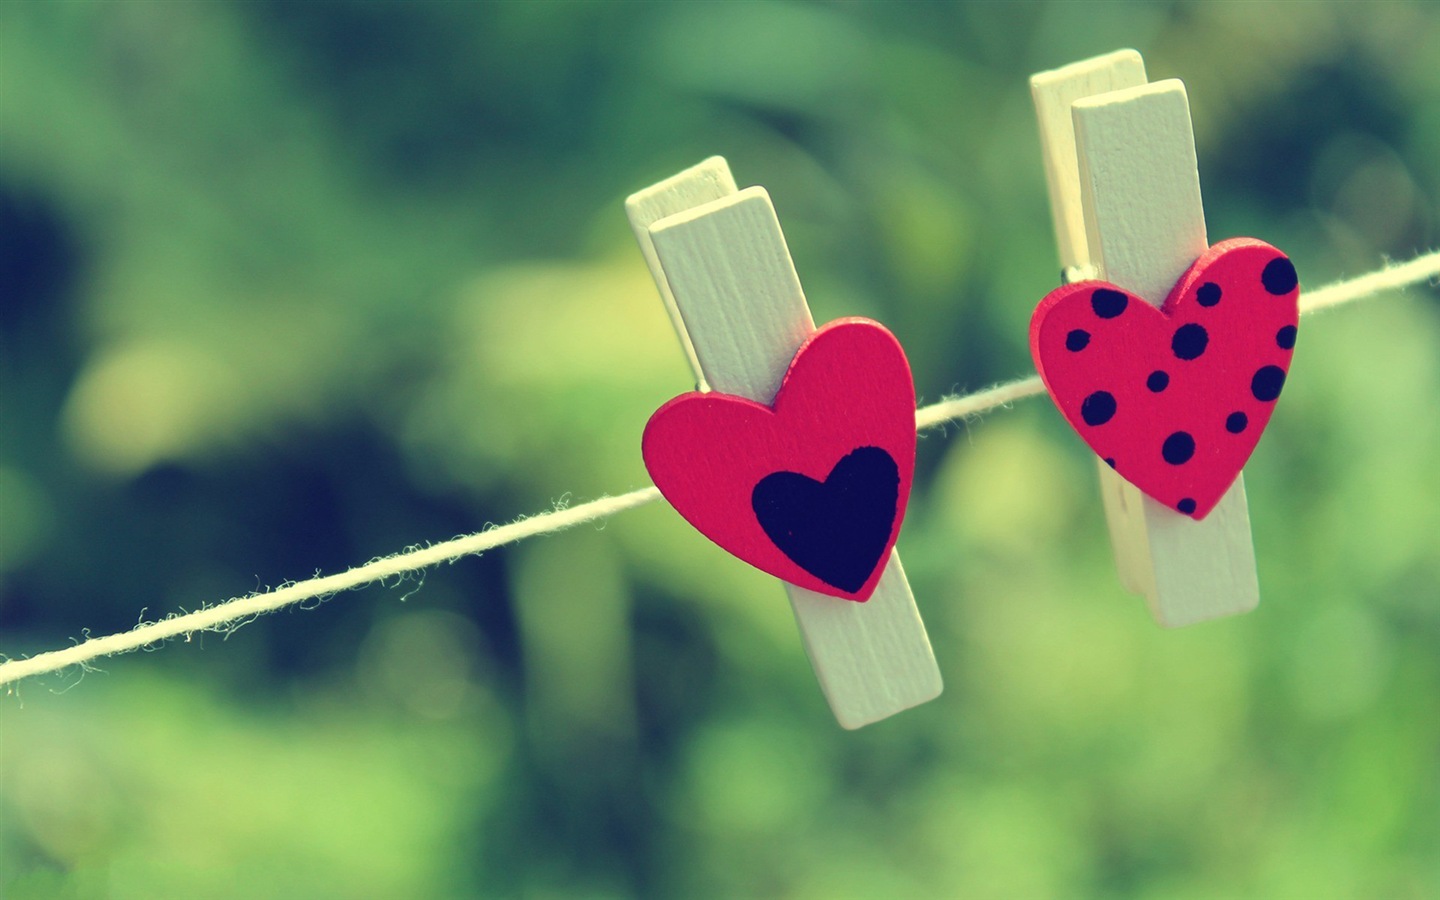 The theme of love, creative heart-shaped HD wallpapers #18 - 1440x900